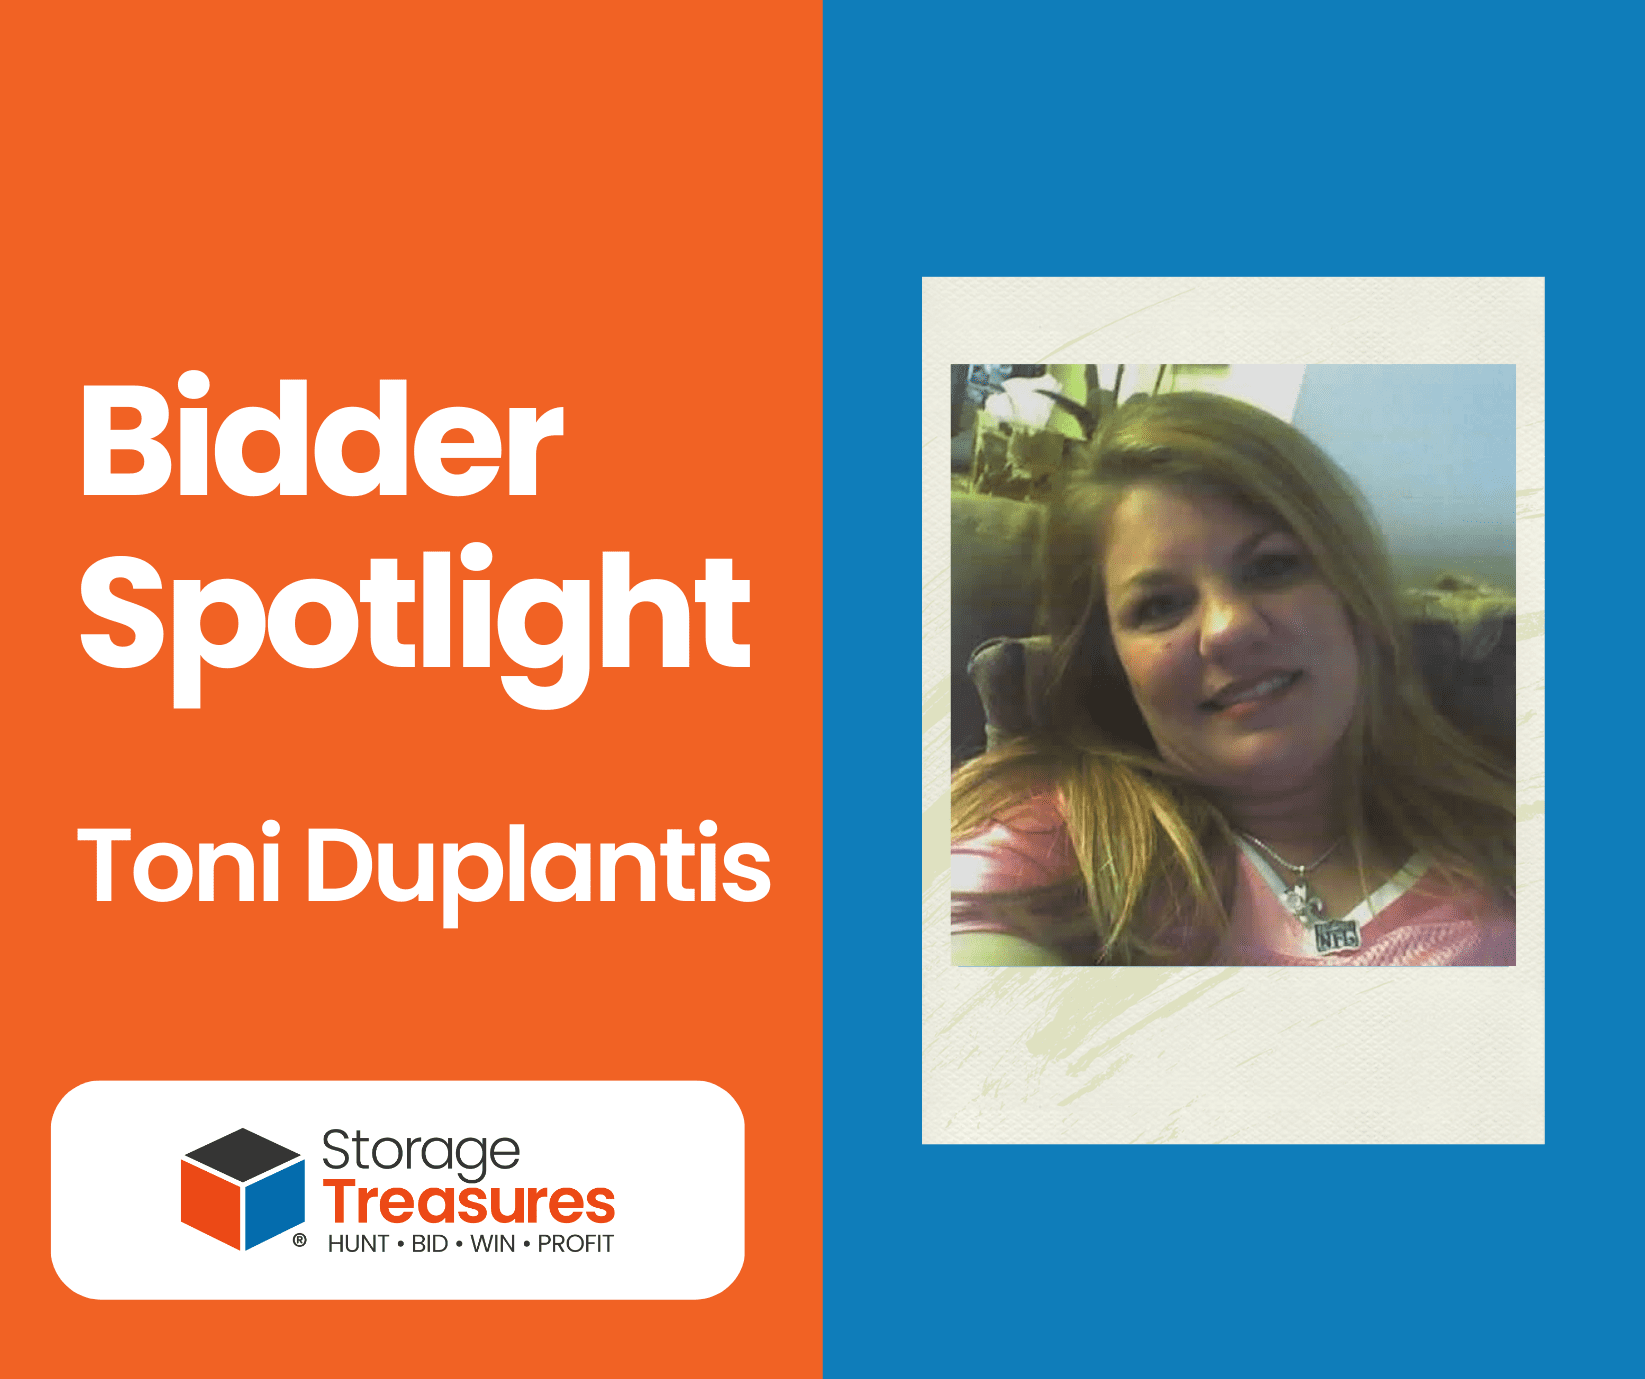 Learn more about our storage auction bidder, Toni Duplantis.